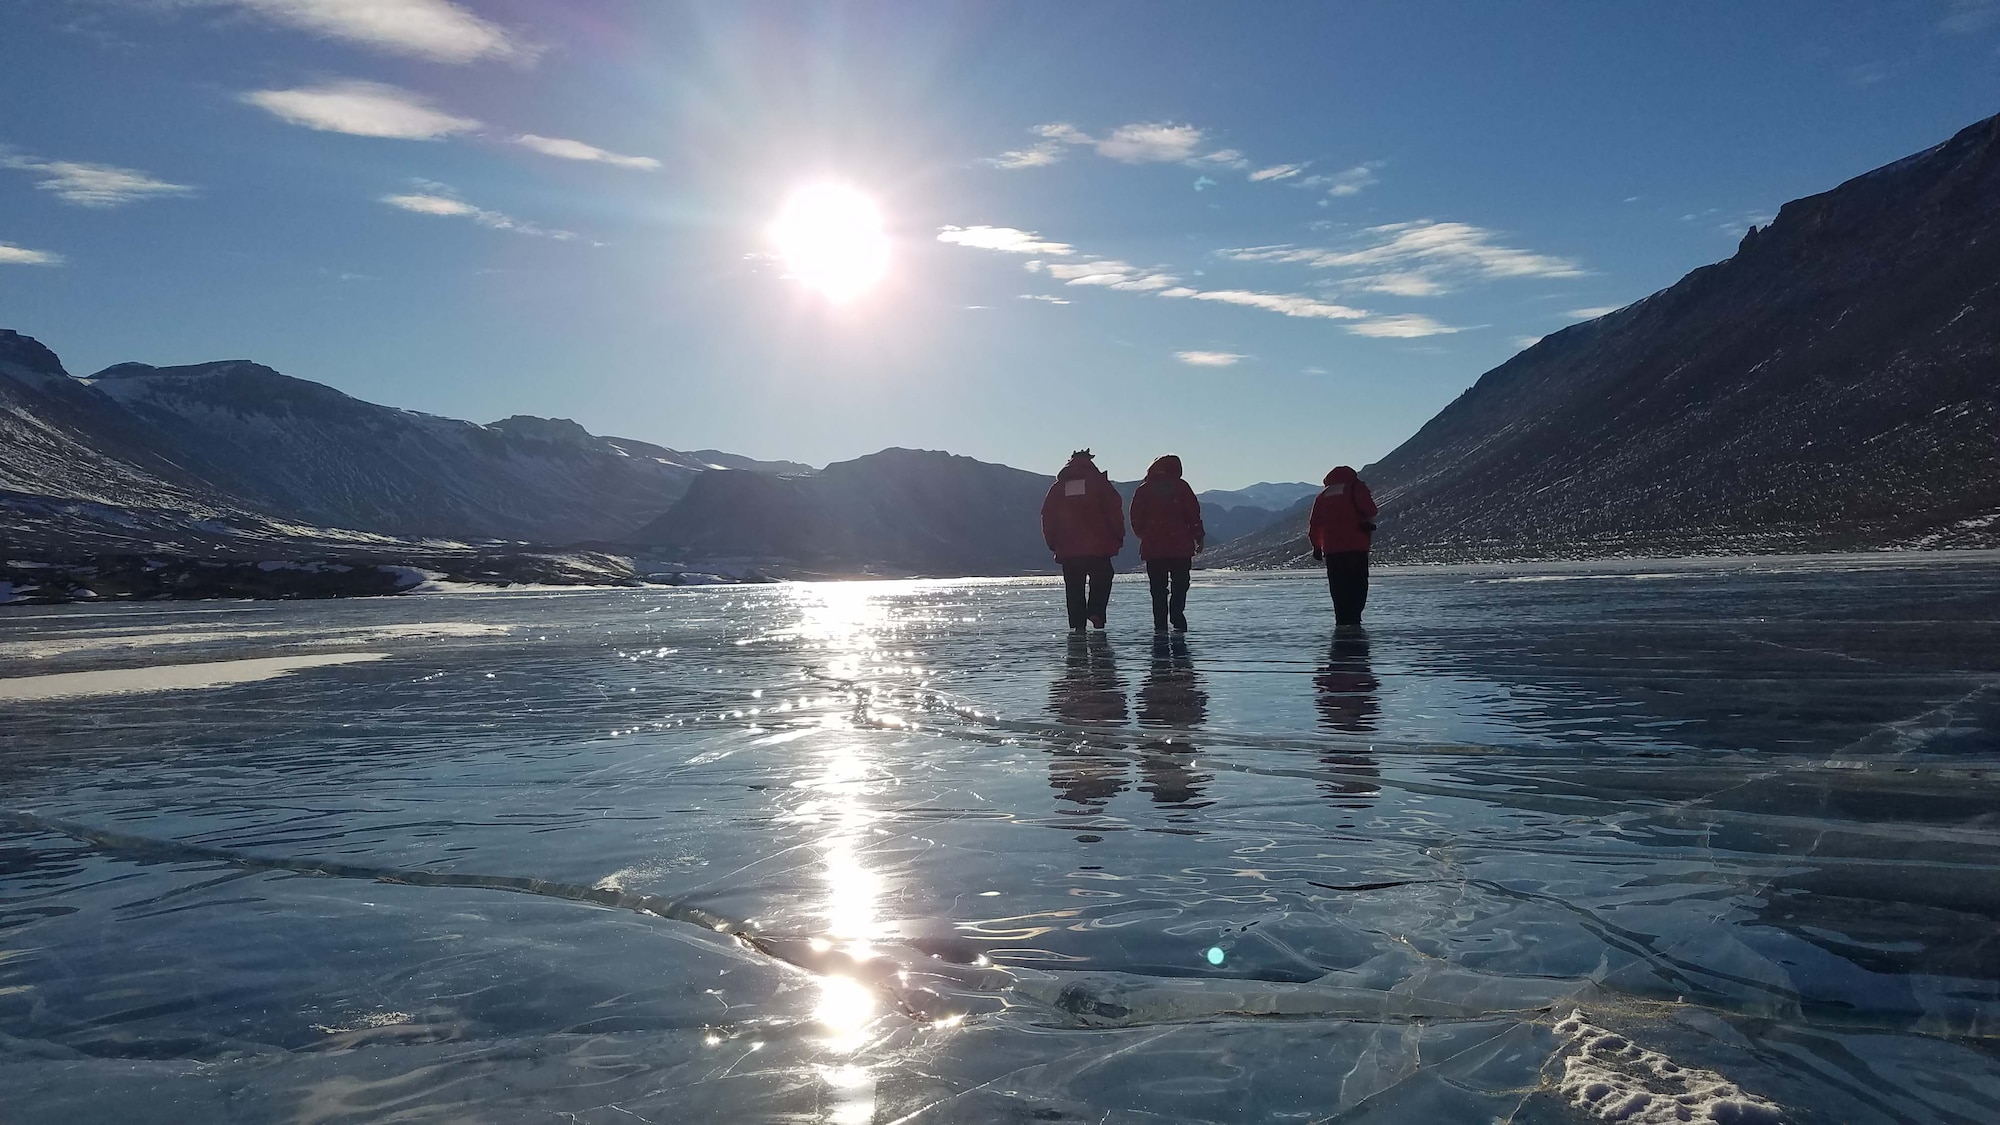 Airmen from the Air Force Technical Applications Center, Patrick AFB, Fla., walk on a frozen lake in Antarctica after a full day of performing maintenance on the center’s seismic equipment near Bull Pass.  The photo, taken at about 10 p.m., illustrates the 24-hour daylight cycle at Earth’s southernmost point.  Pictured from left to right:  Staff. Sgt. Jeremy Hannah, Senior Airman Andrew Pouncy and Staff Sgt. Justin Sherman.  (U.S. Air Force photo by Senior Airman Richard Westra)